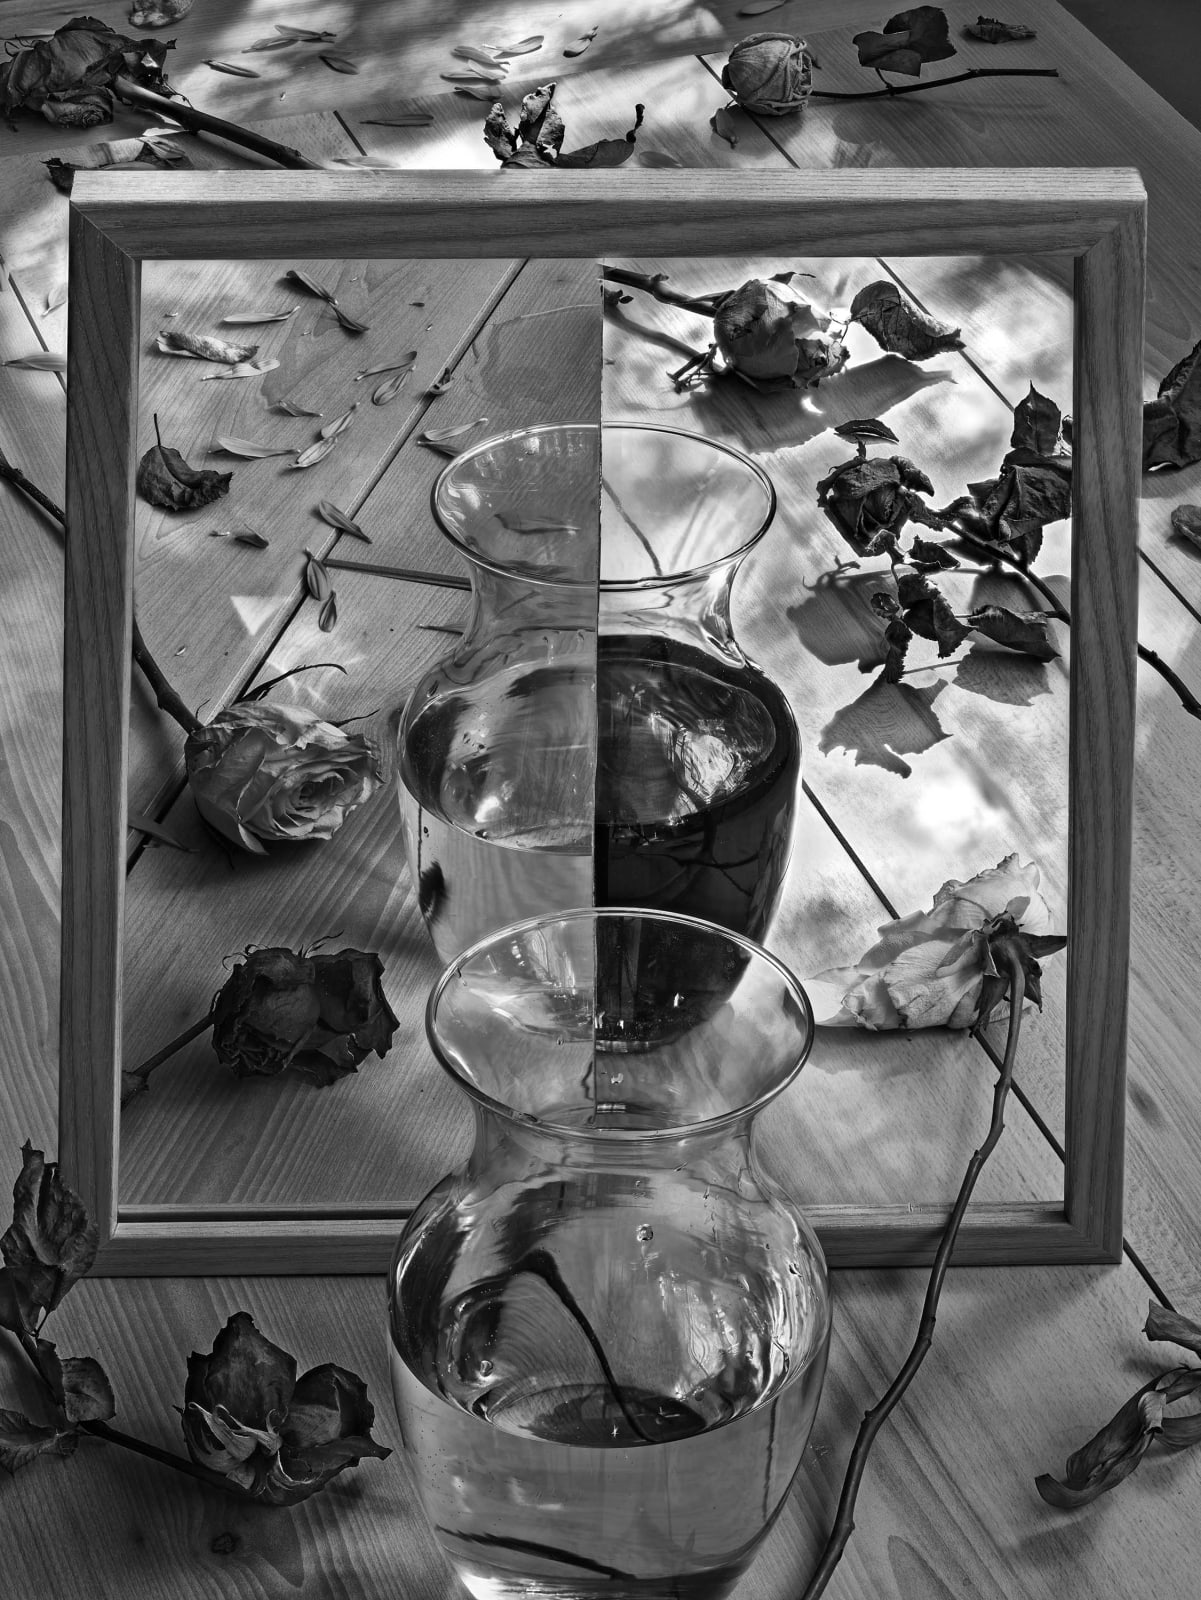 Abelardo Morell Flowers for Lisa #66 After Lewis Carroll black and white photograph of illusion of vase of water with reflection of vase and flower that pierces the mirror